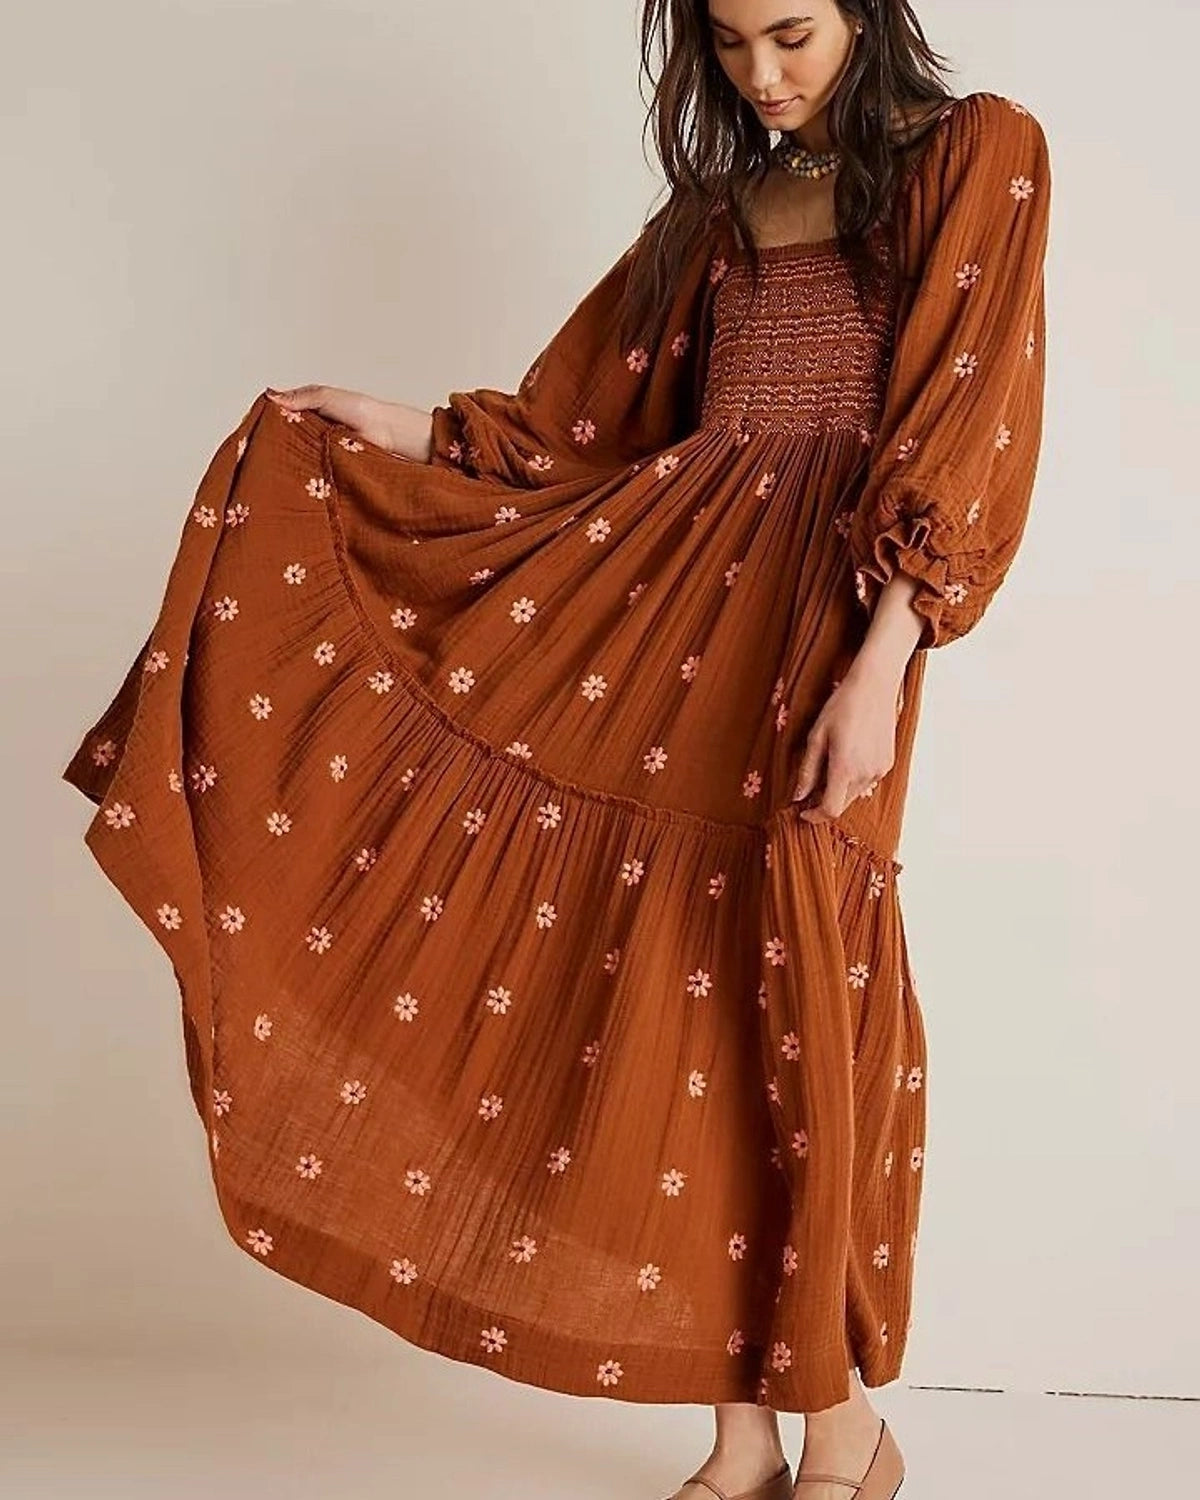 TIERED EMBROIDERED DRESS,balloon sleeves, beach, bohemian, brown, casual, cotton, dresses, embroidered, fit and flare, floral, long sleeves, loungewear, maxi, relaxed fit, smocked, square neck, summer, textured, vacation, woven,tiered-embroidered-dress,Neck - Square neckSleeve - Balloon sleeveFit - Relaxed fitPrint/Pattern - SolidColor - BrownLength - MaxiType - Tiered dressMaterial - CottonDetail - Embroidered